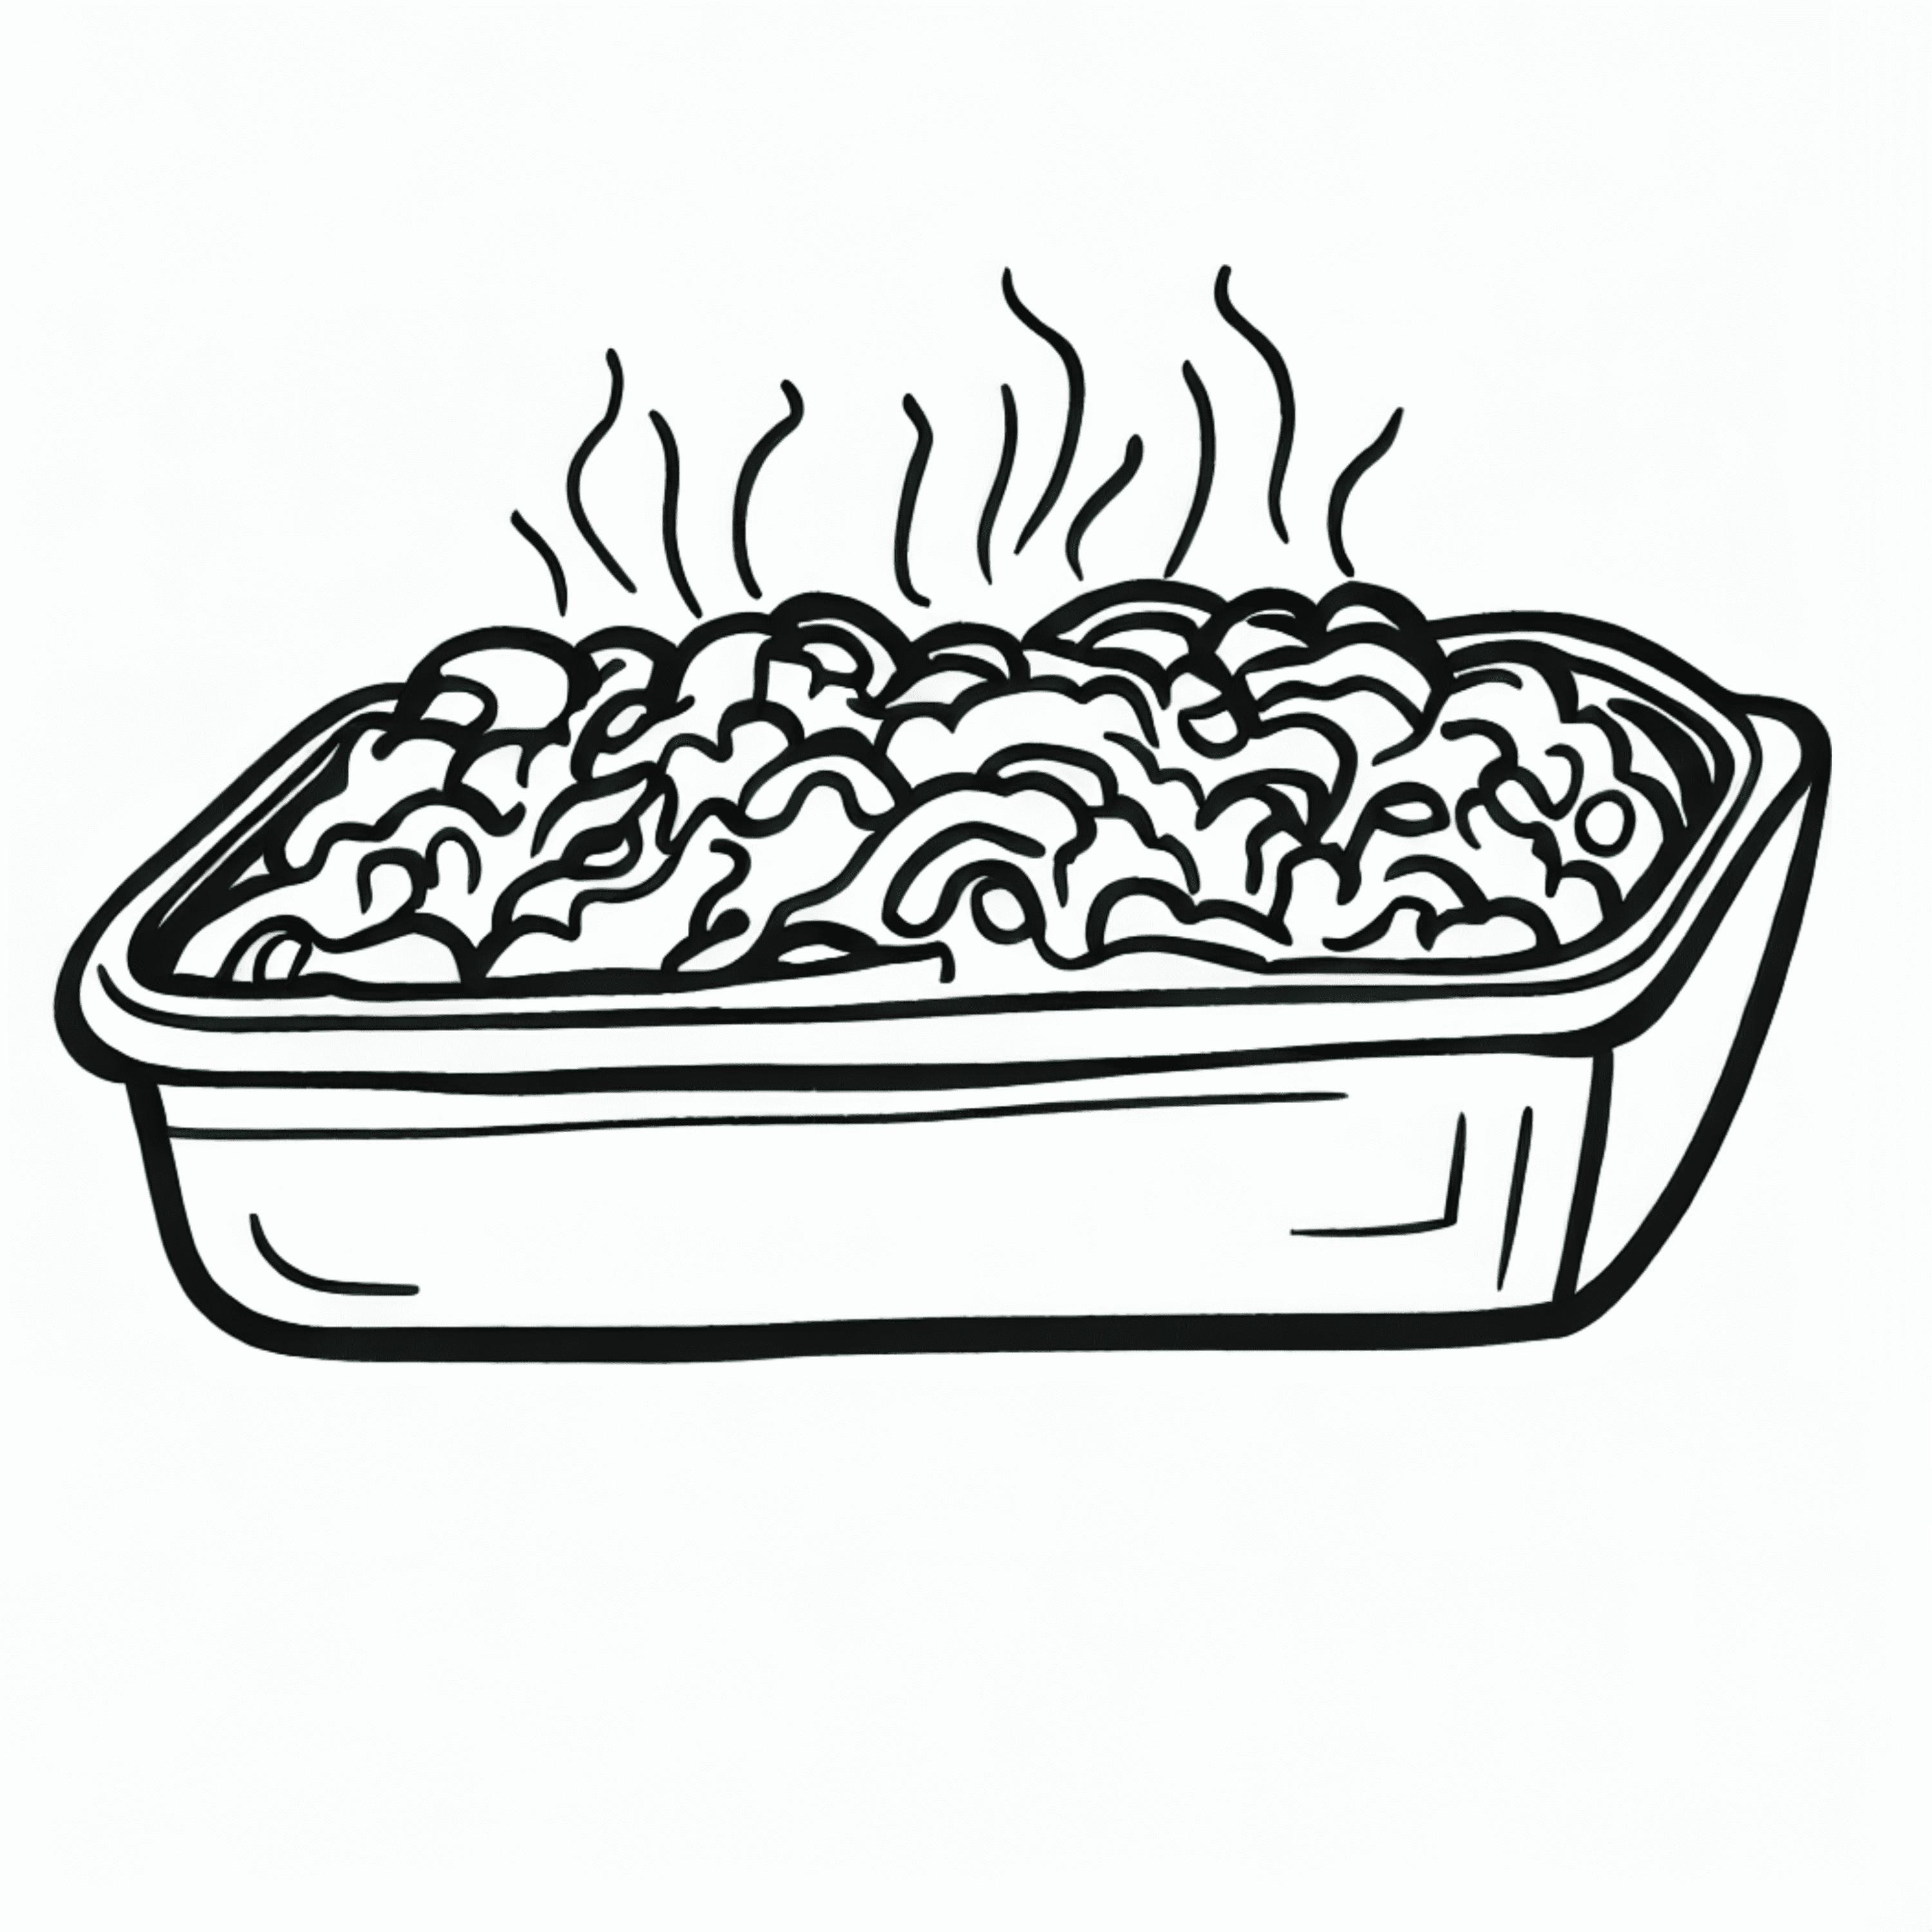 Line drawing of a casserole dish